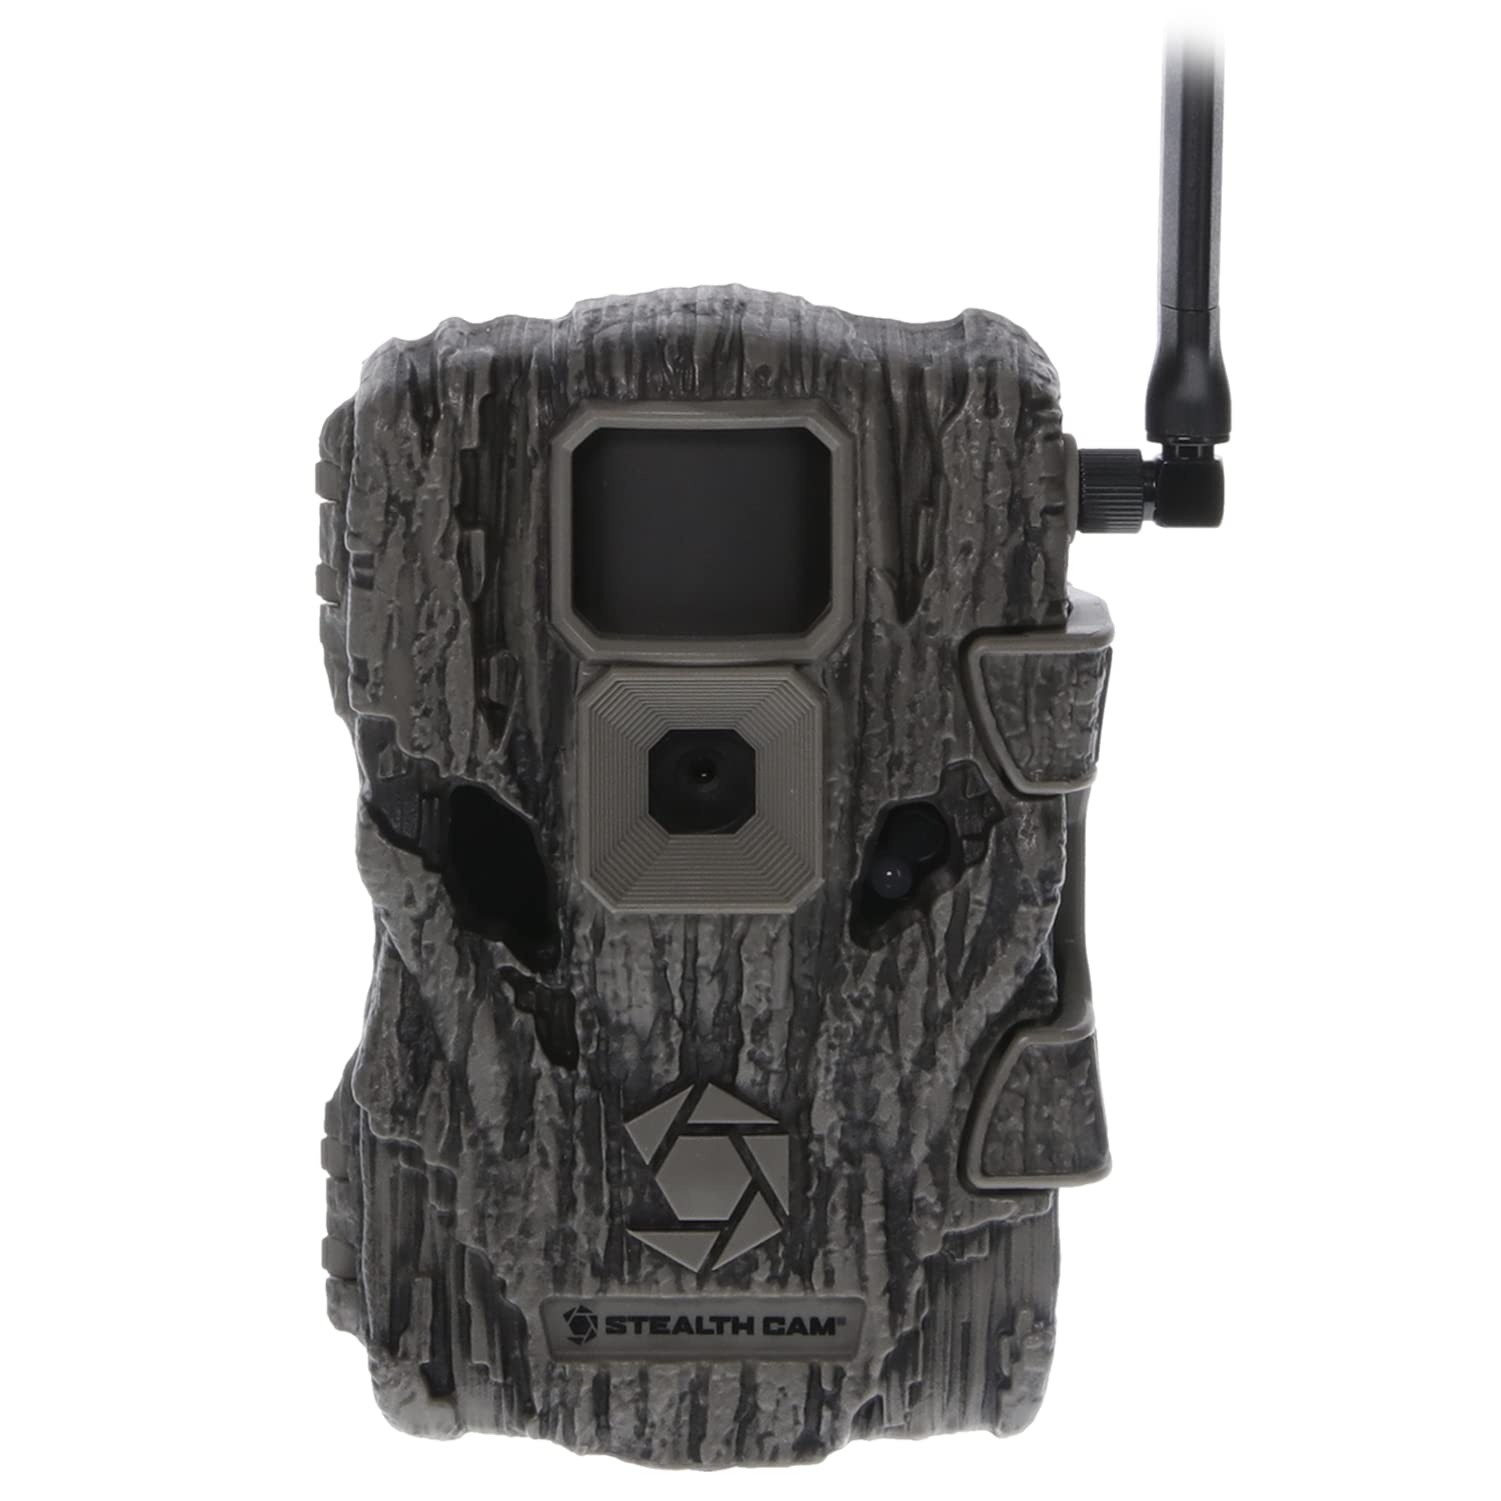 Stealth Cam Fusion X 26 MP Photo & 1080P at 30FPS Video 0.4 Sec Trigger Speed Wireless Hunting Trail Camera - Supports SD Cards Up to 32GB